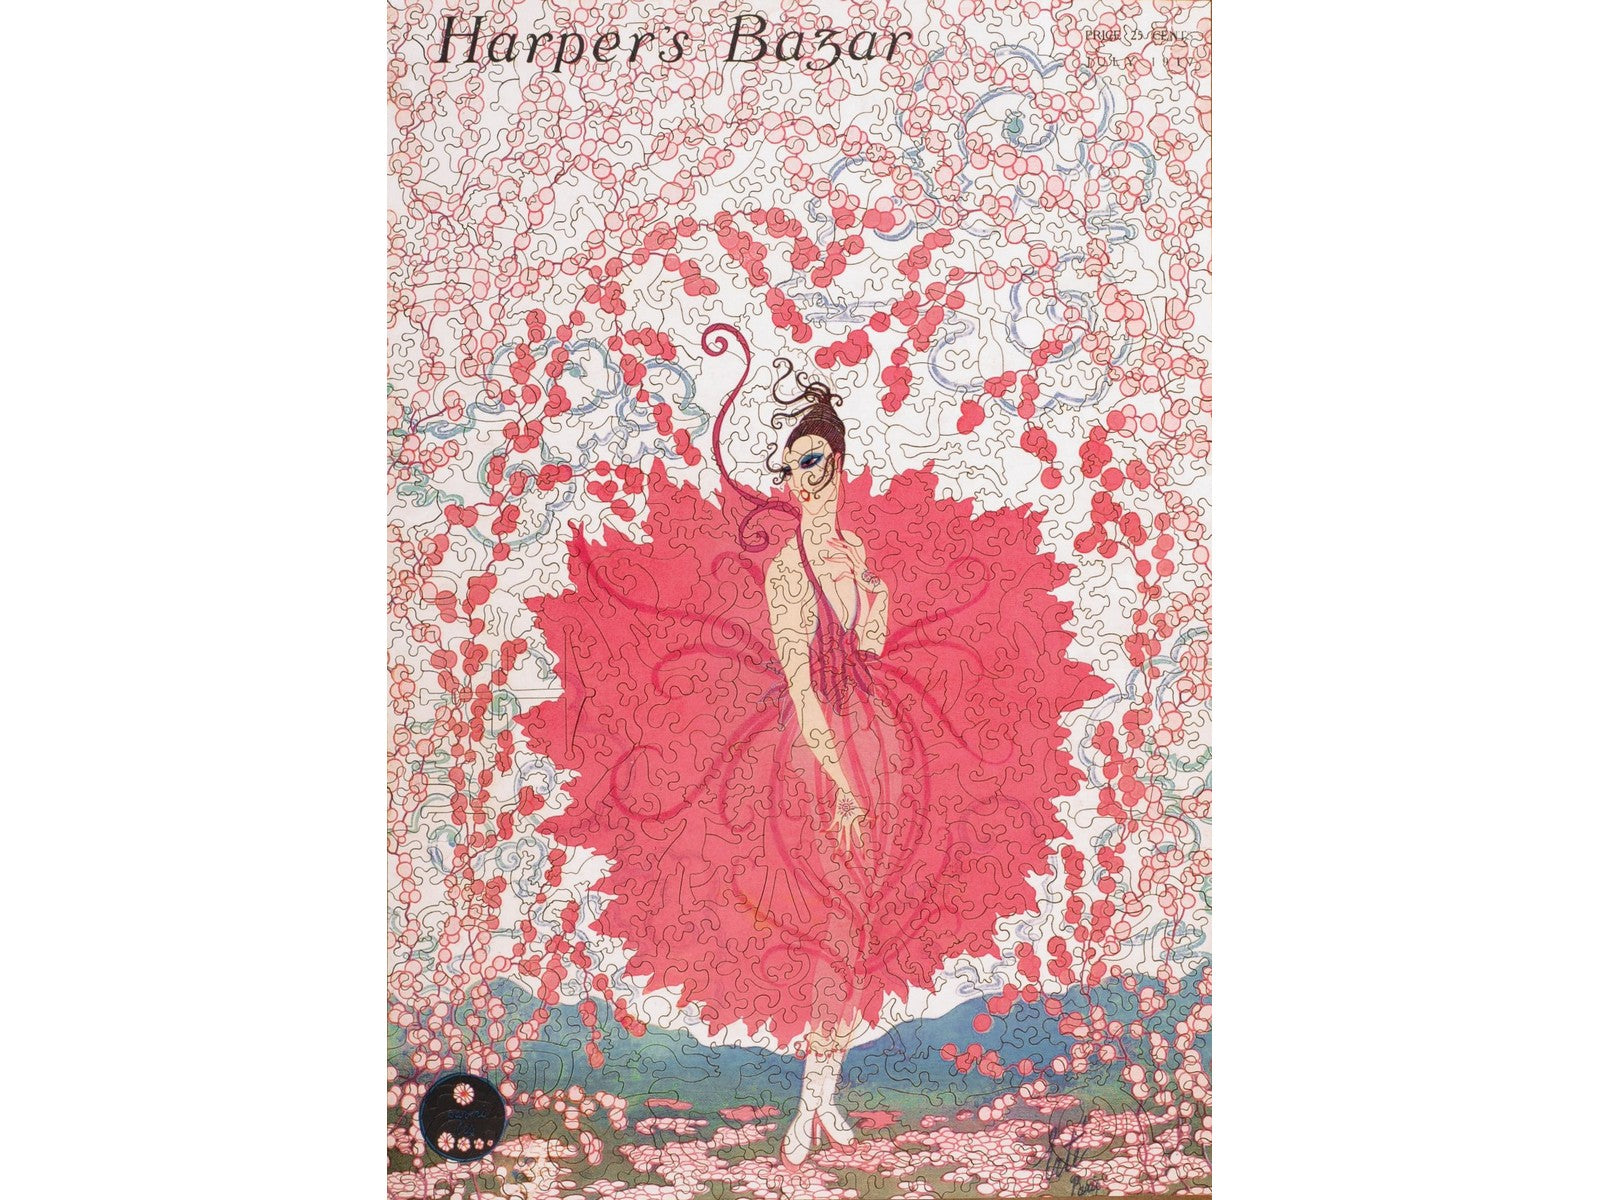 The front of the puzzle, Harper's Bazar, which shows a woman in a pink dress, surrounded by flowers.